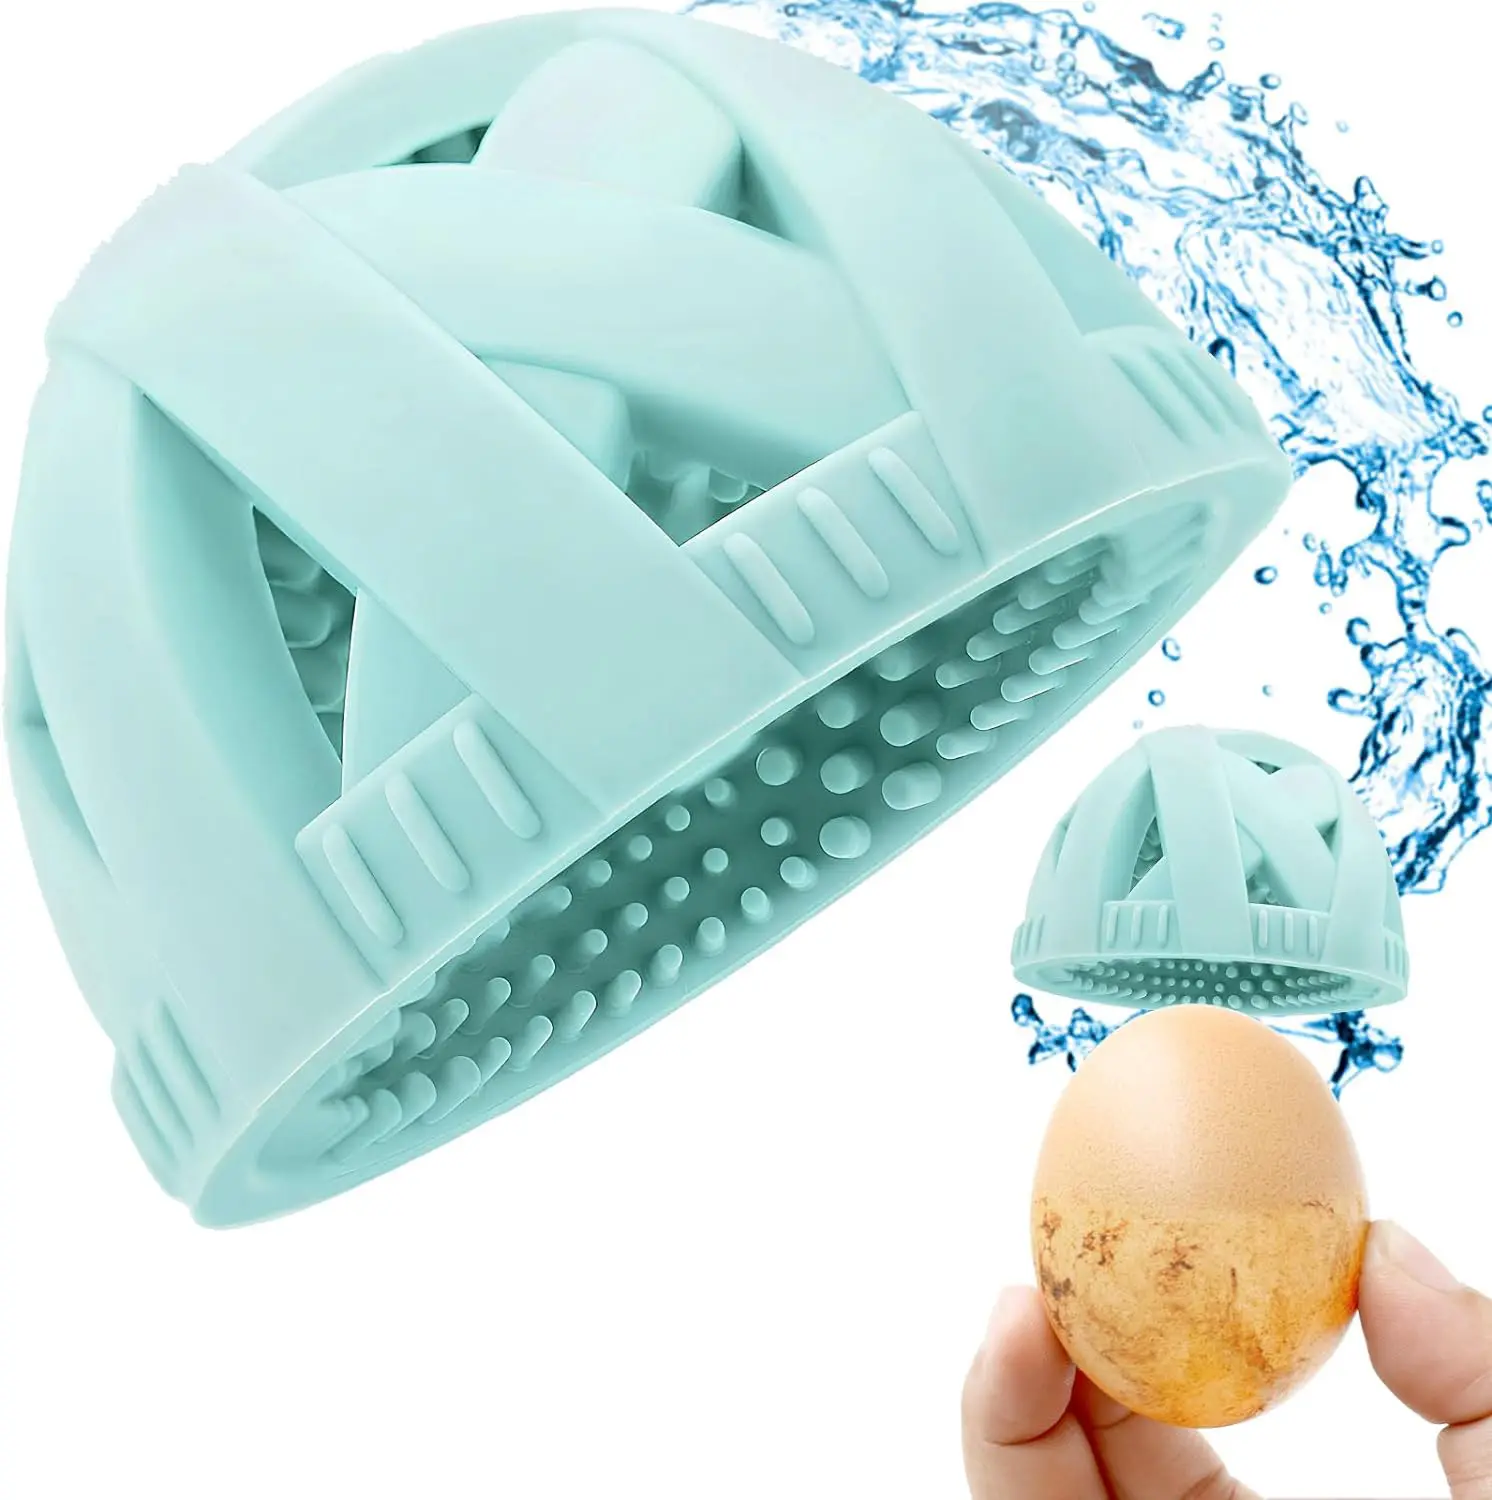 New Reusable Silicone Egg Washer Cleaner Chicken Egg Scrubber Roller Brush for Cleaning Fresh Eggs